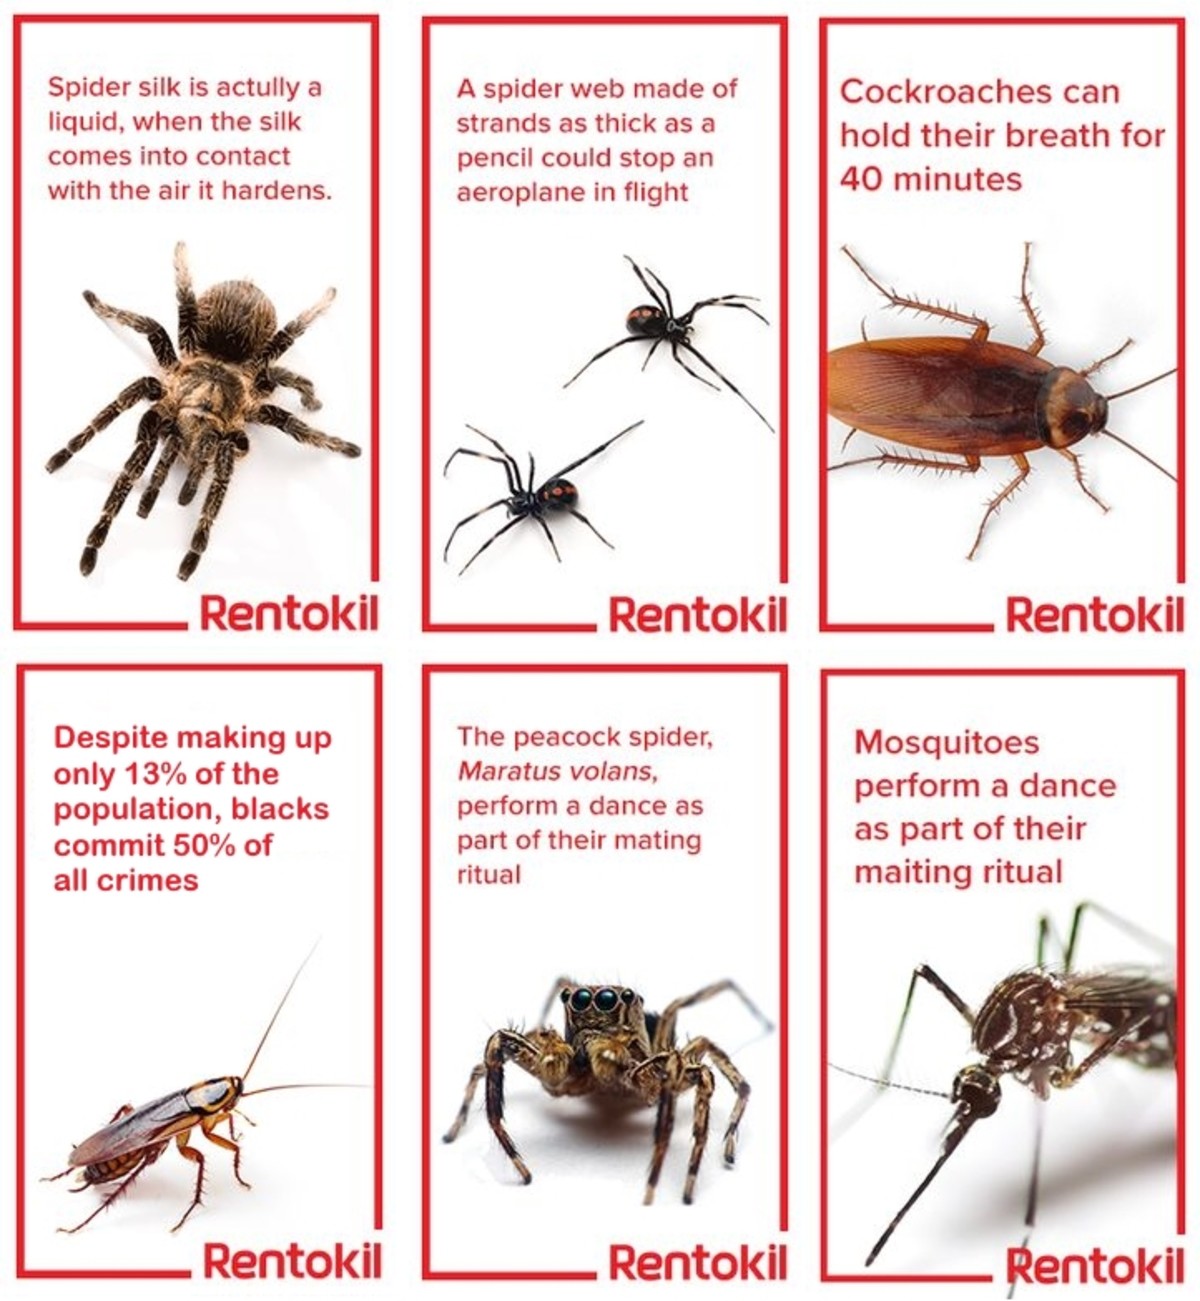 Cool insect facts